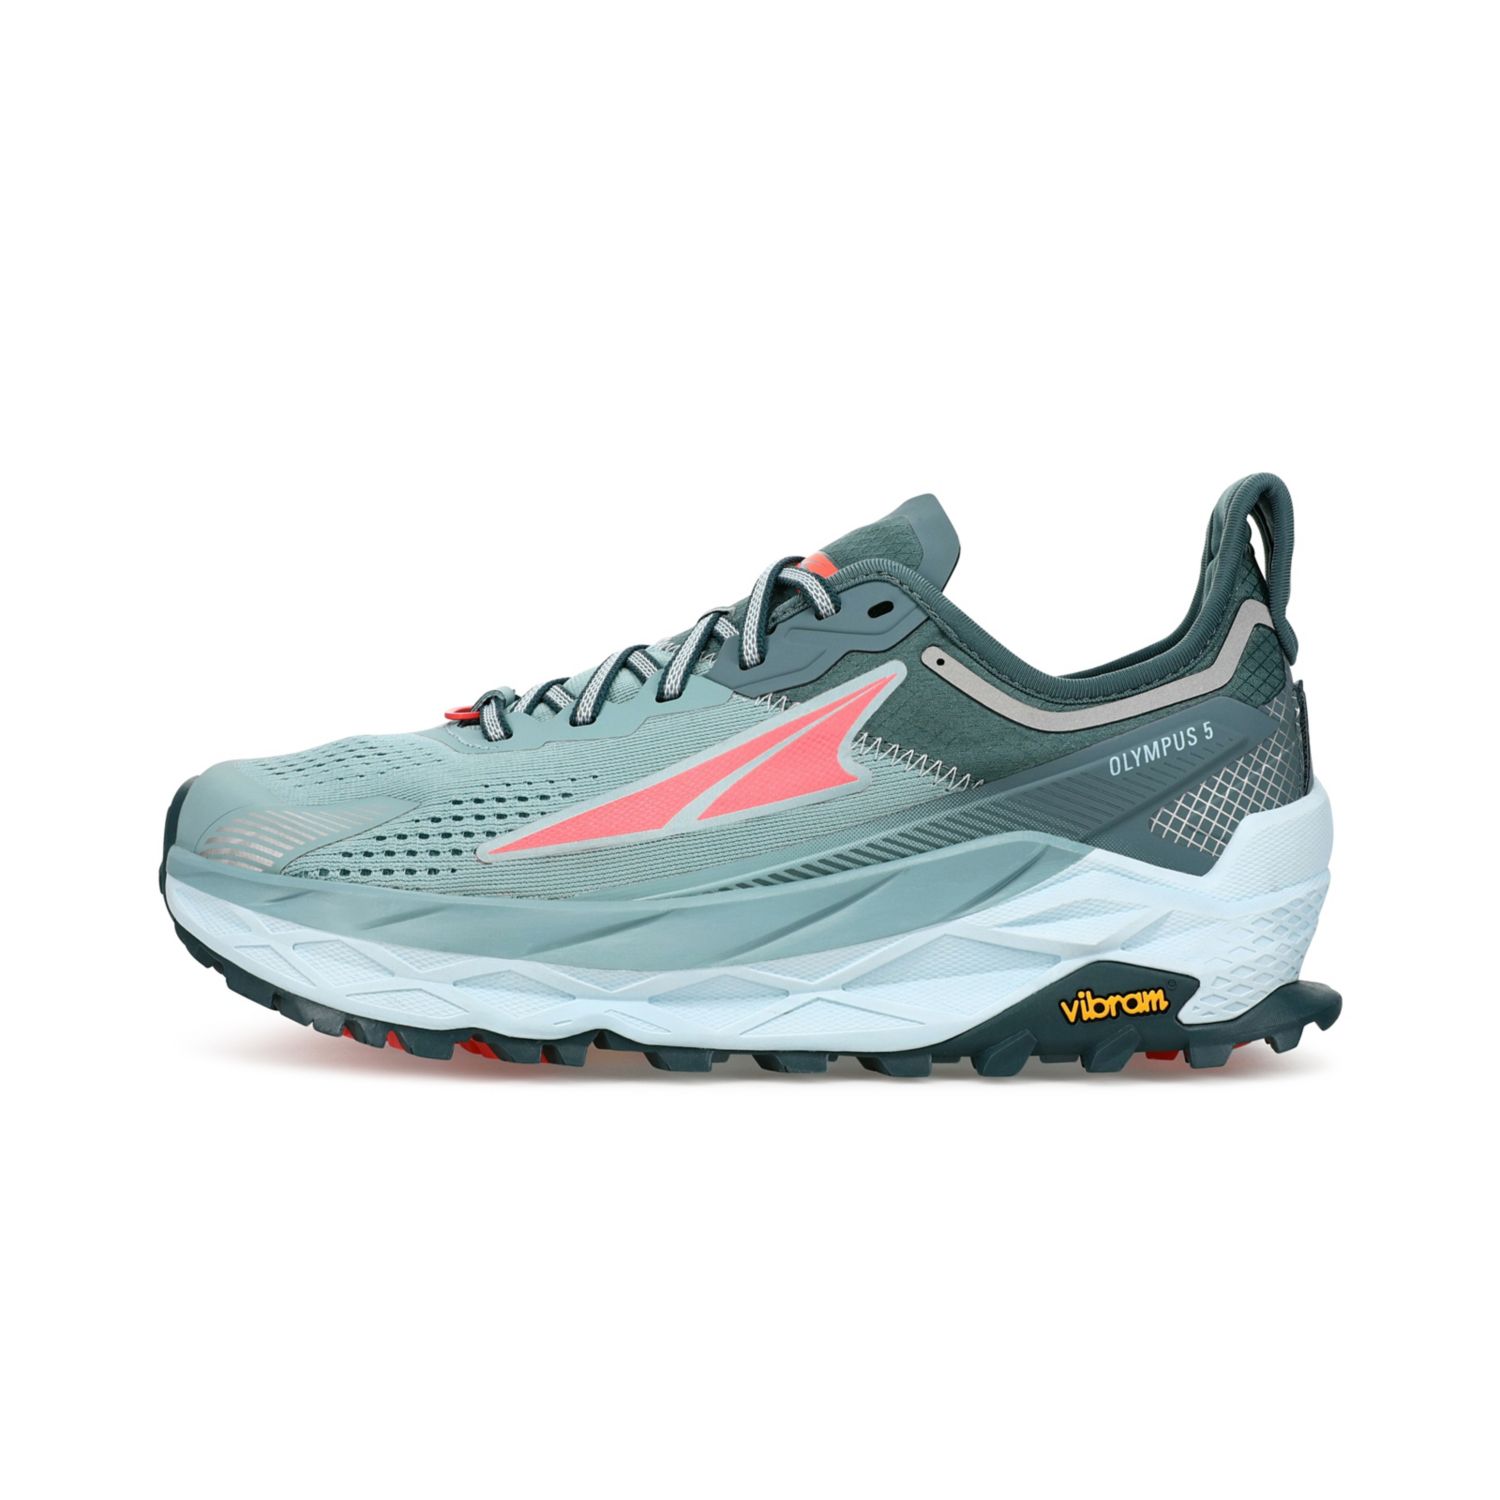 Turquoise Women's Altra Olympus 5 Trail Running Shoes | UAE-27041989